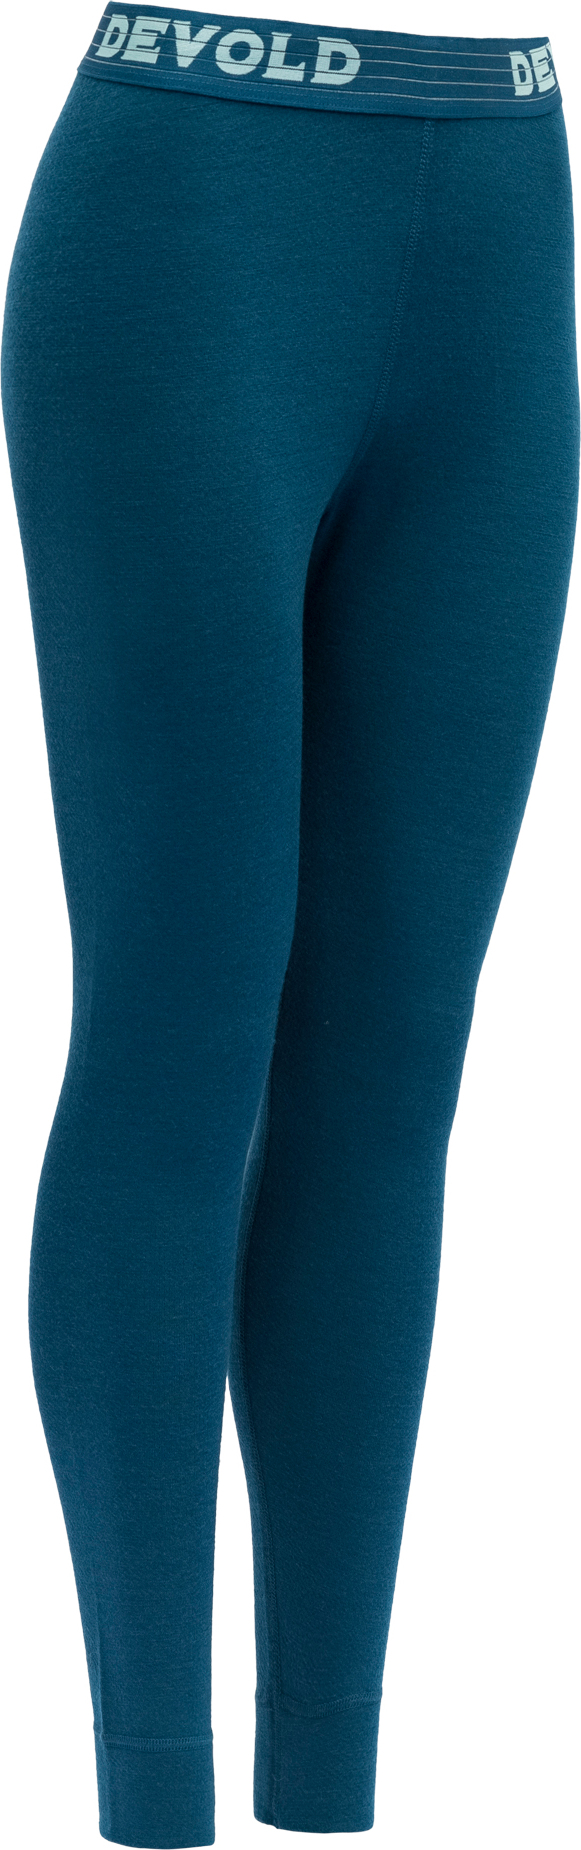 Devold Women’s Expedition Long Johns Flood